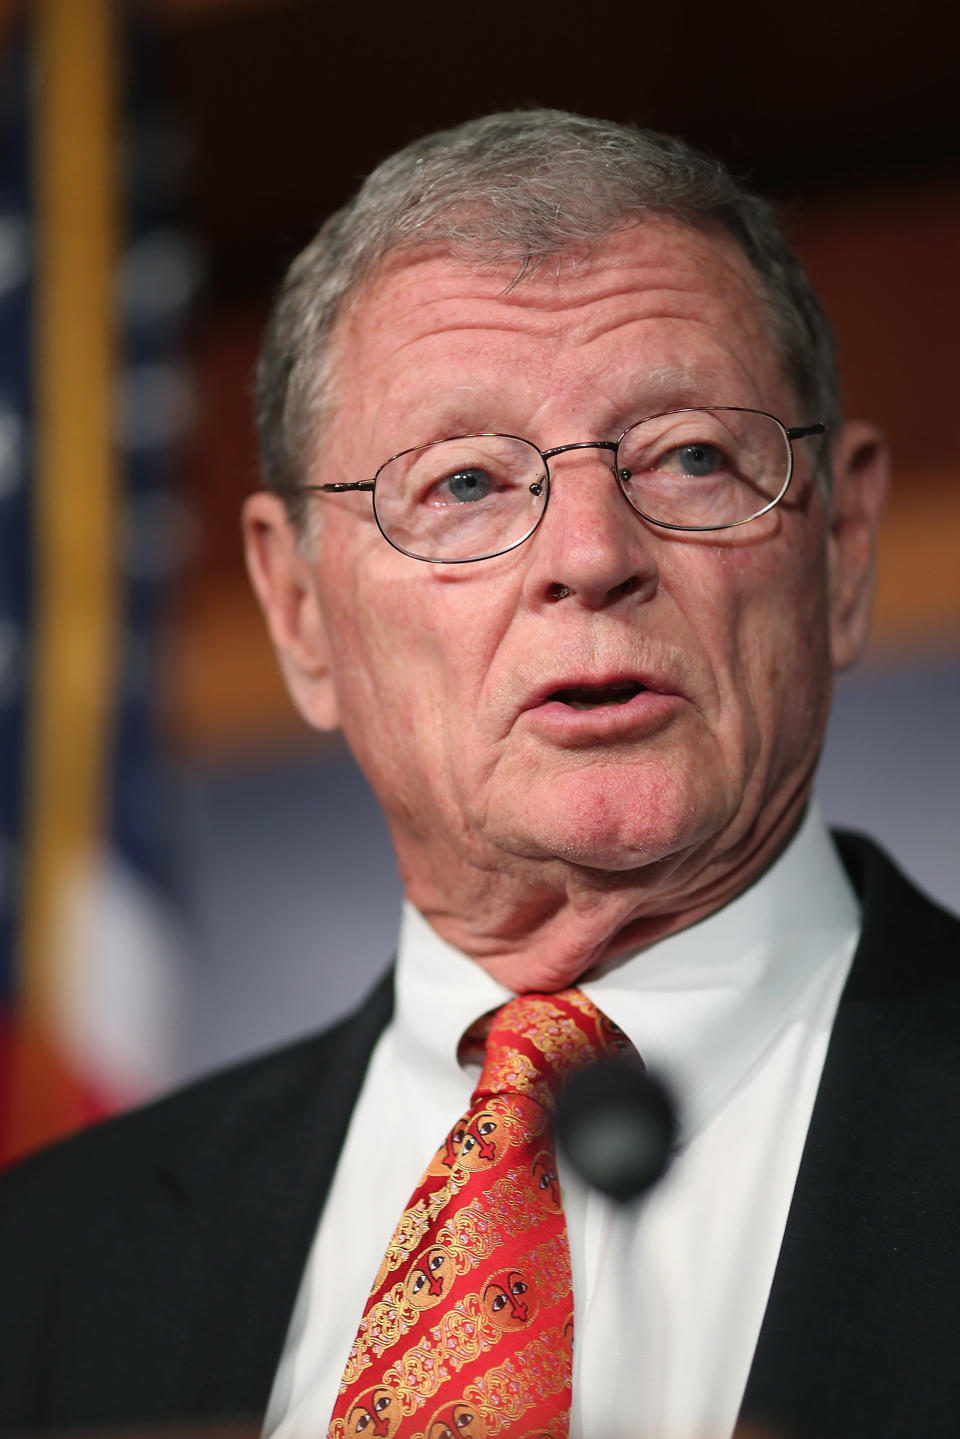 Sen. James Inhofe (R-Okla.) speaks during a news conference at the U.S. Capitol March 13, 2013 in Washington, D.C. (Photo by Chip Somodevilla/Getty Images)